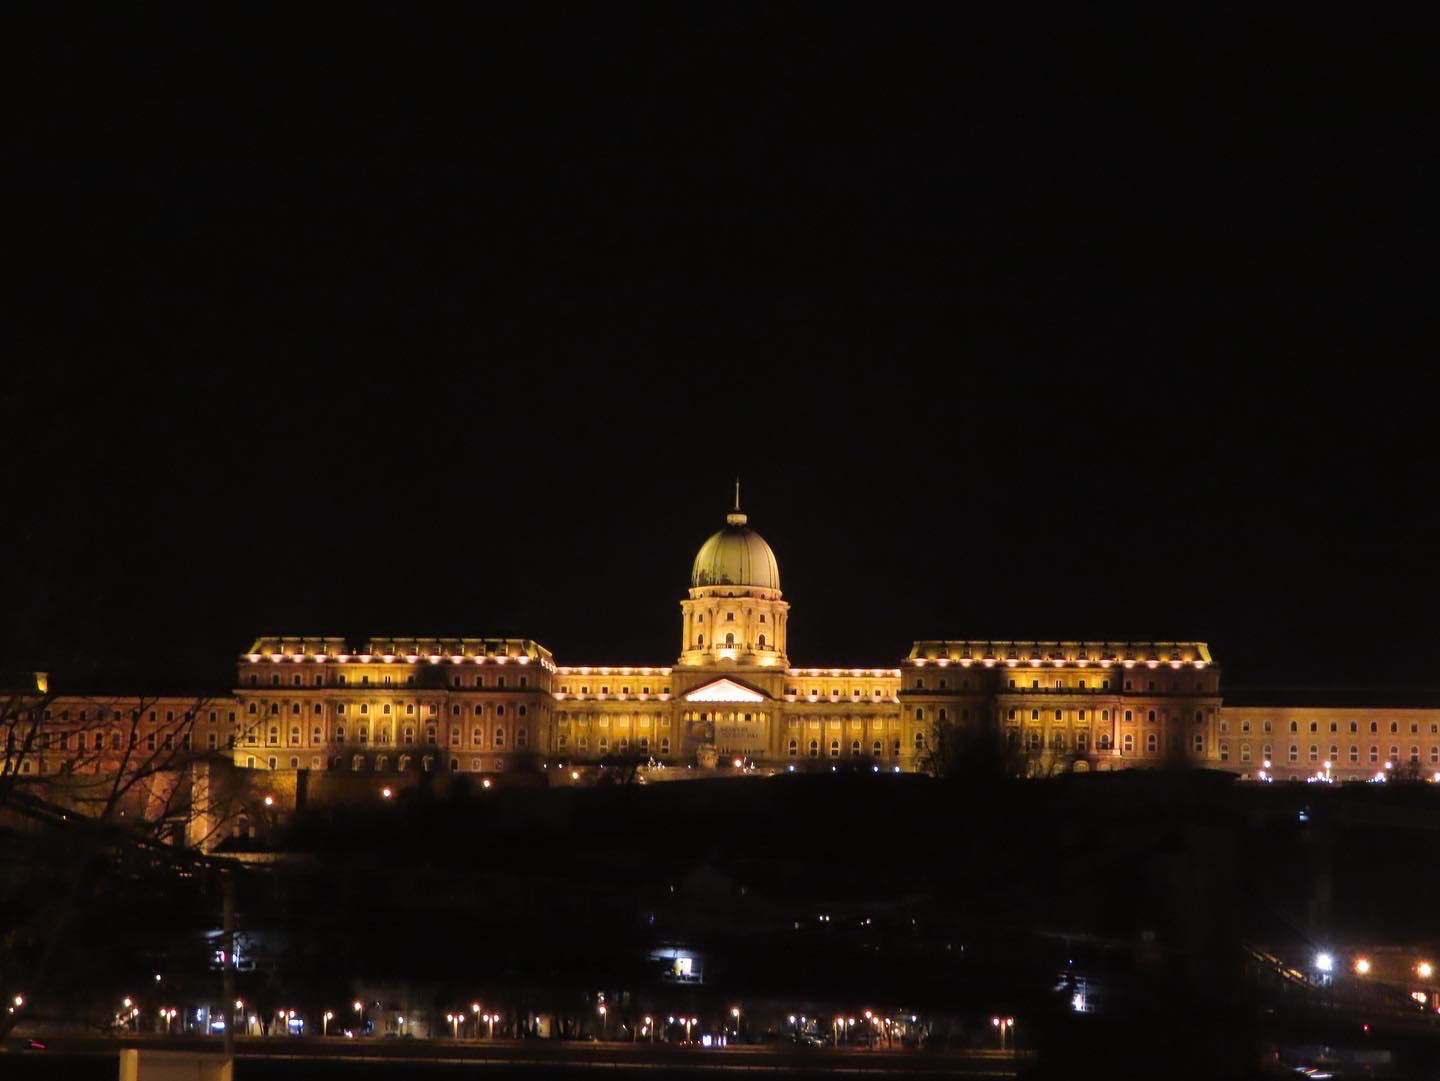 Buda Castle attraction reviews - Buda Castle tickets - Buda Castle  discounts - Buda Castle transportation, address, opening hours -  attractions, hotels, and food near Buda Castle - Trip.com